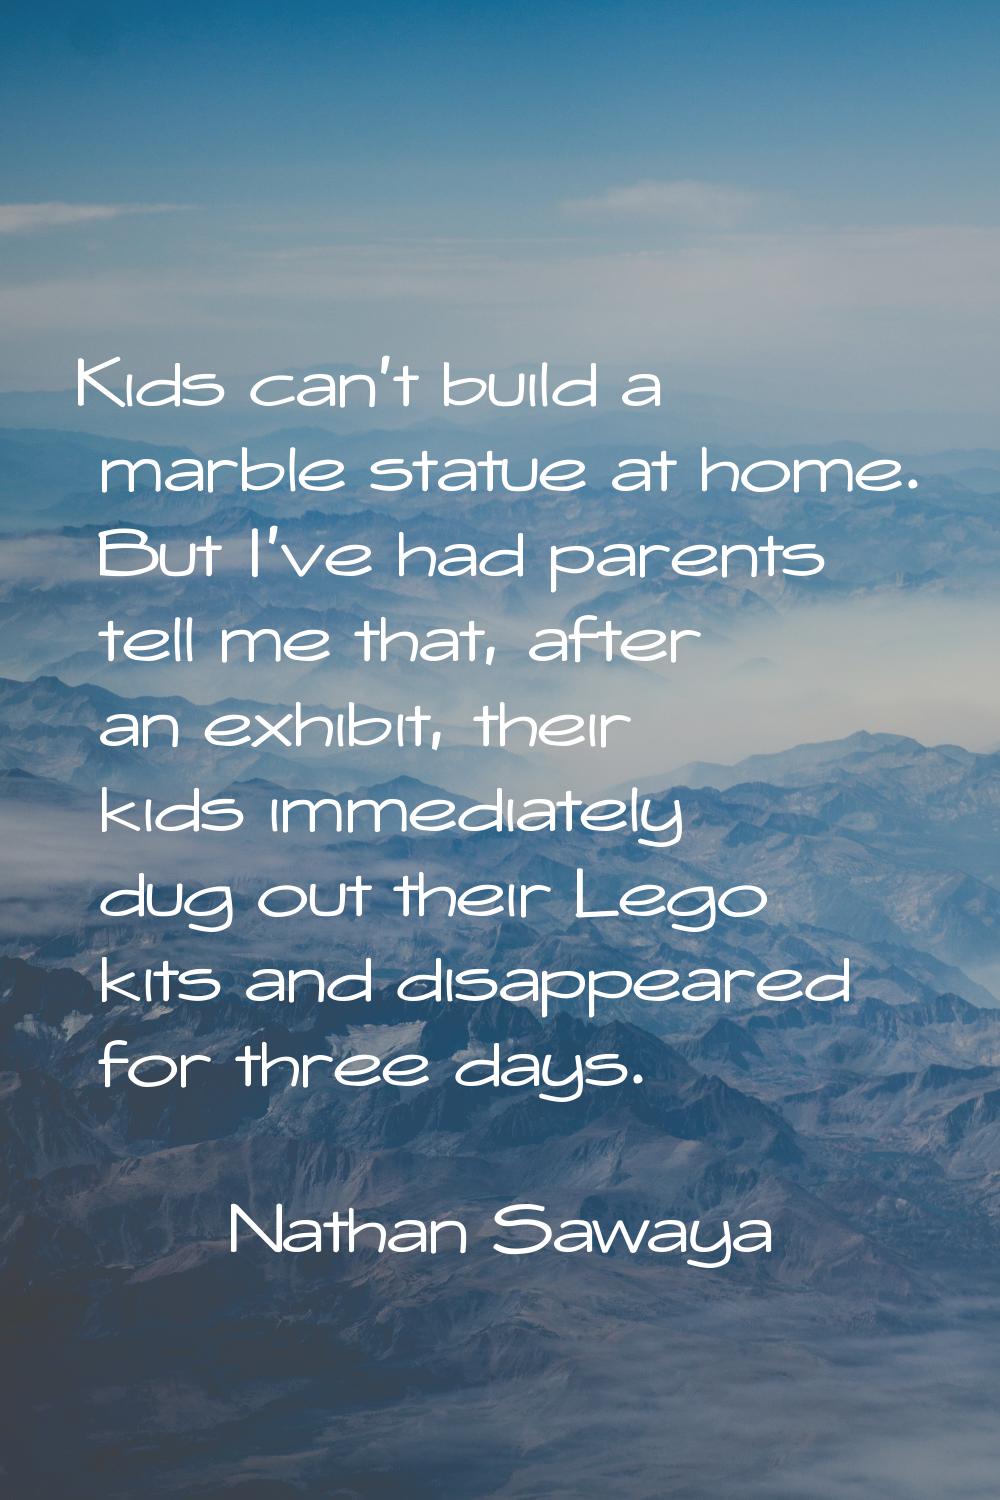 Kids can't build a marble statue at home. But I've had parents tell me that, after an exhibit, thei